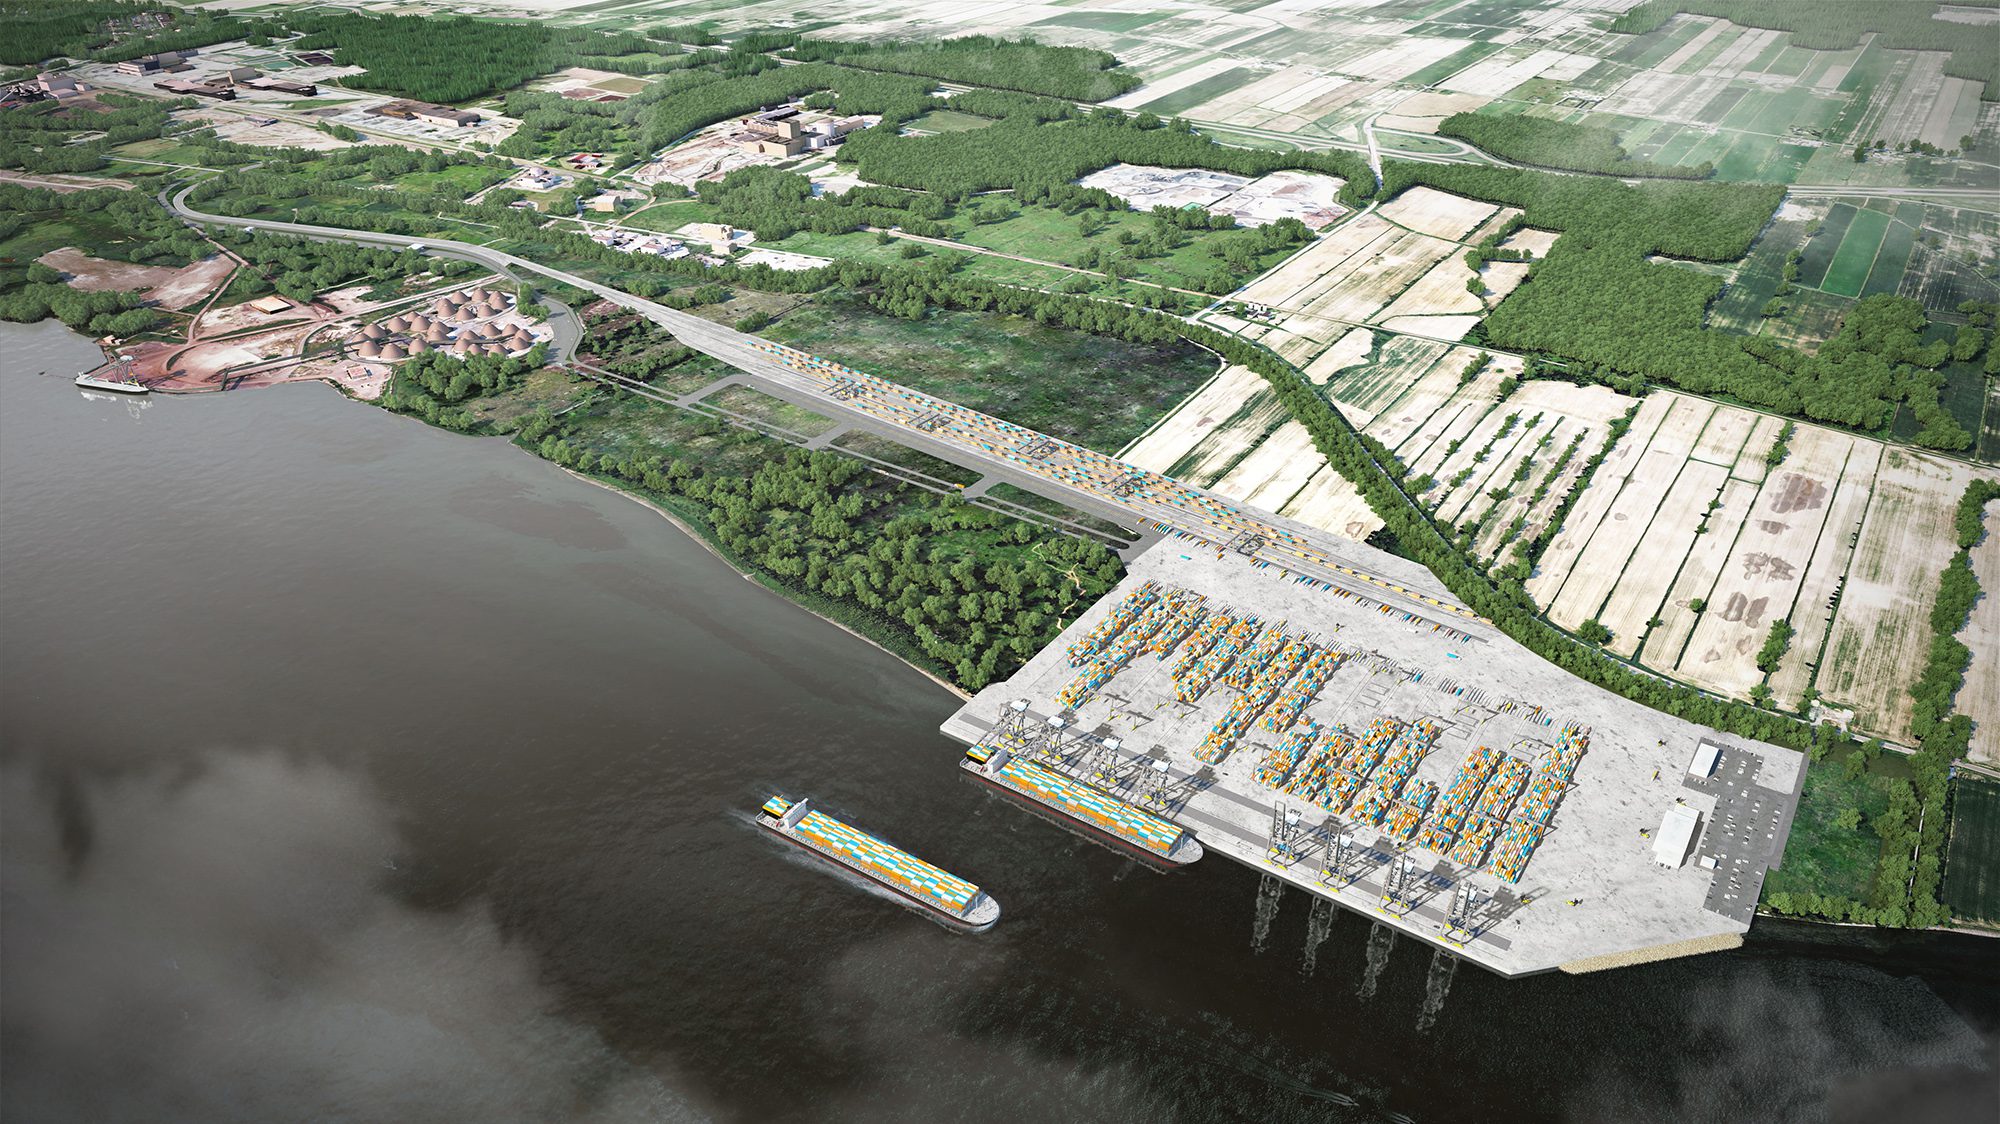 An illustration of the proposed container terminal at the Port of Montreal